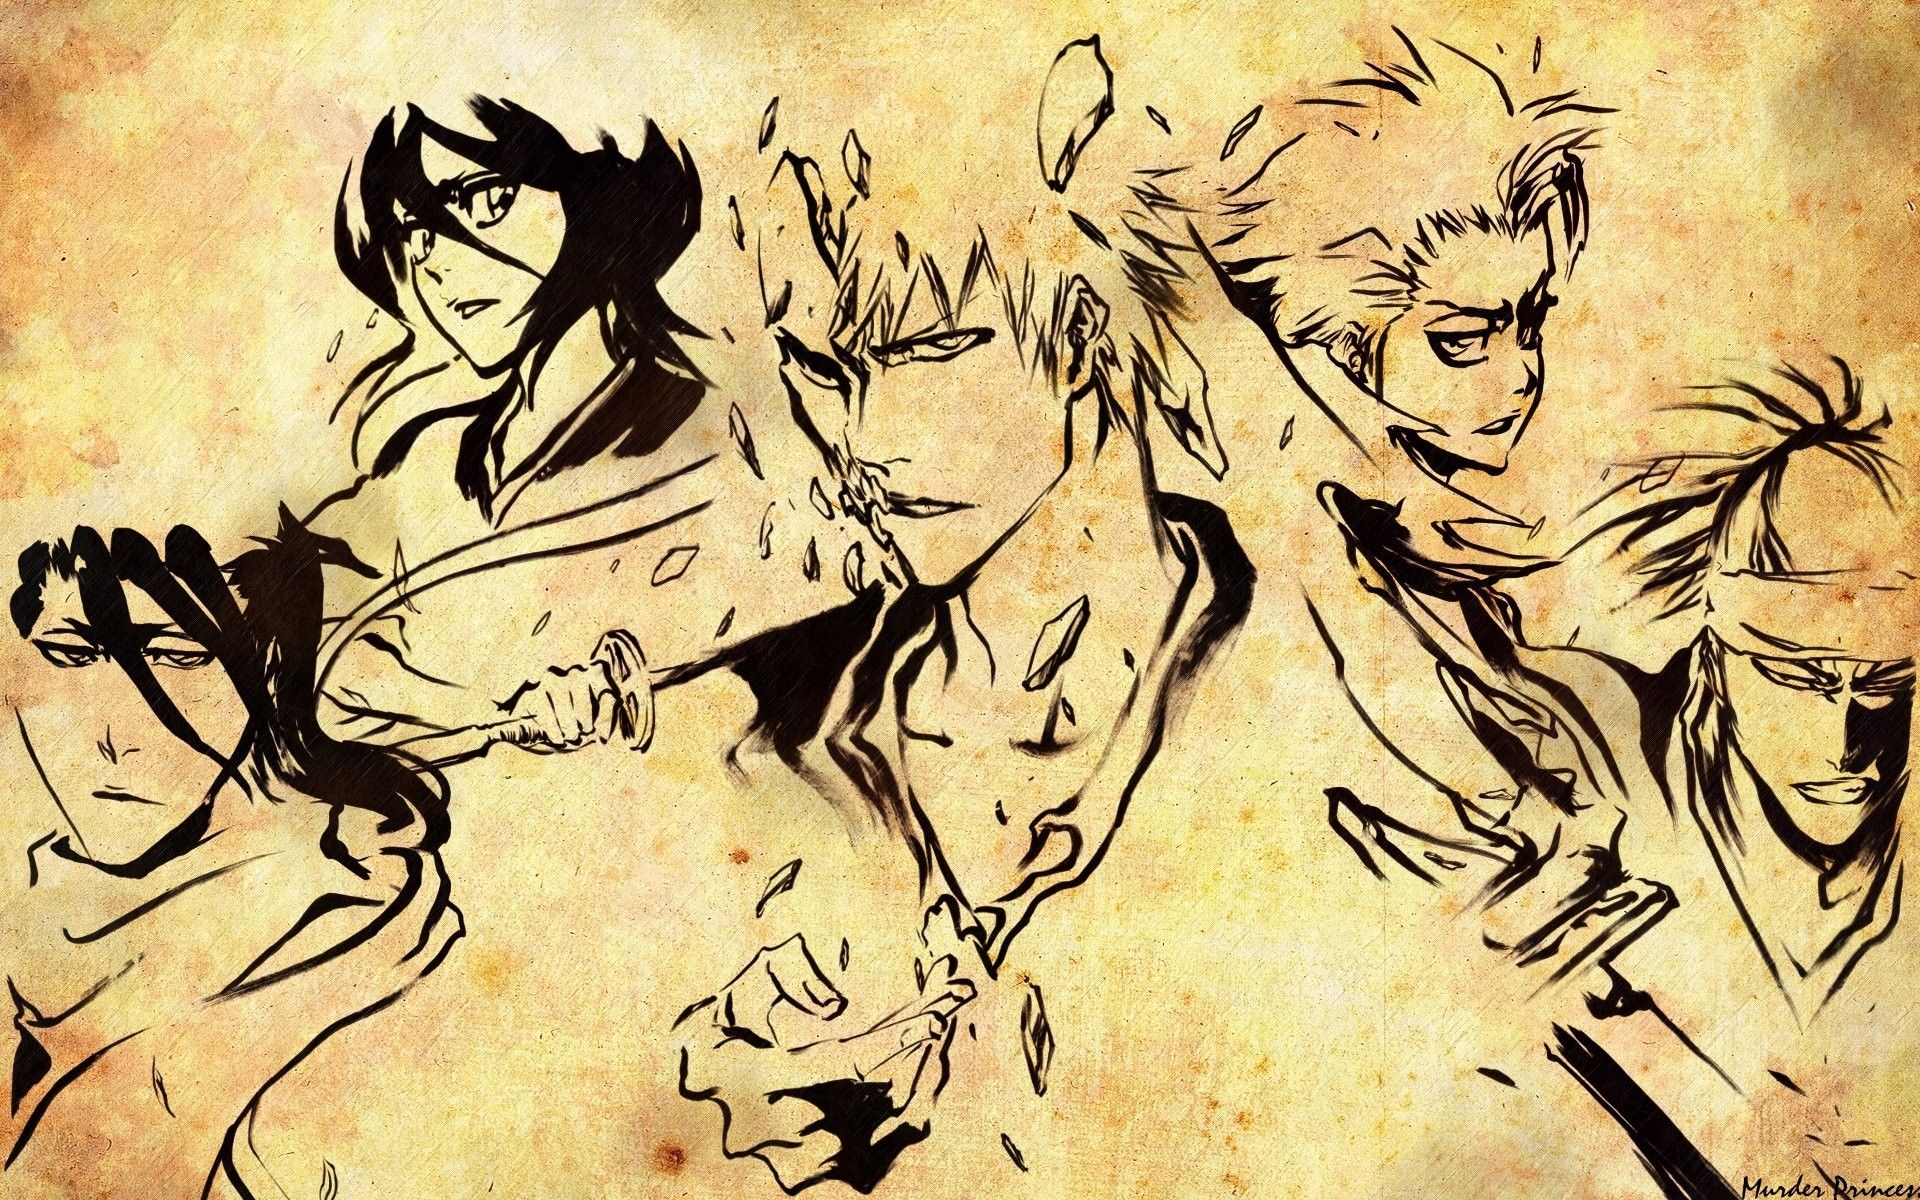 Bleach HD wallpapers - great new desktop background for your screen